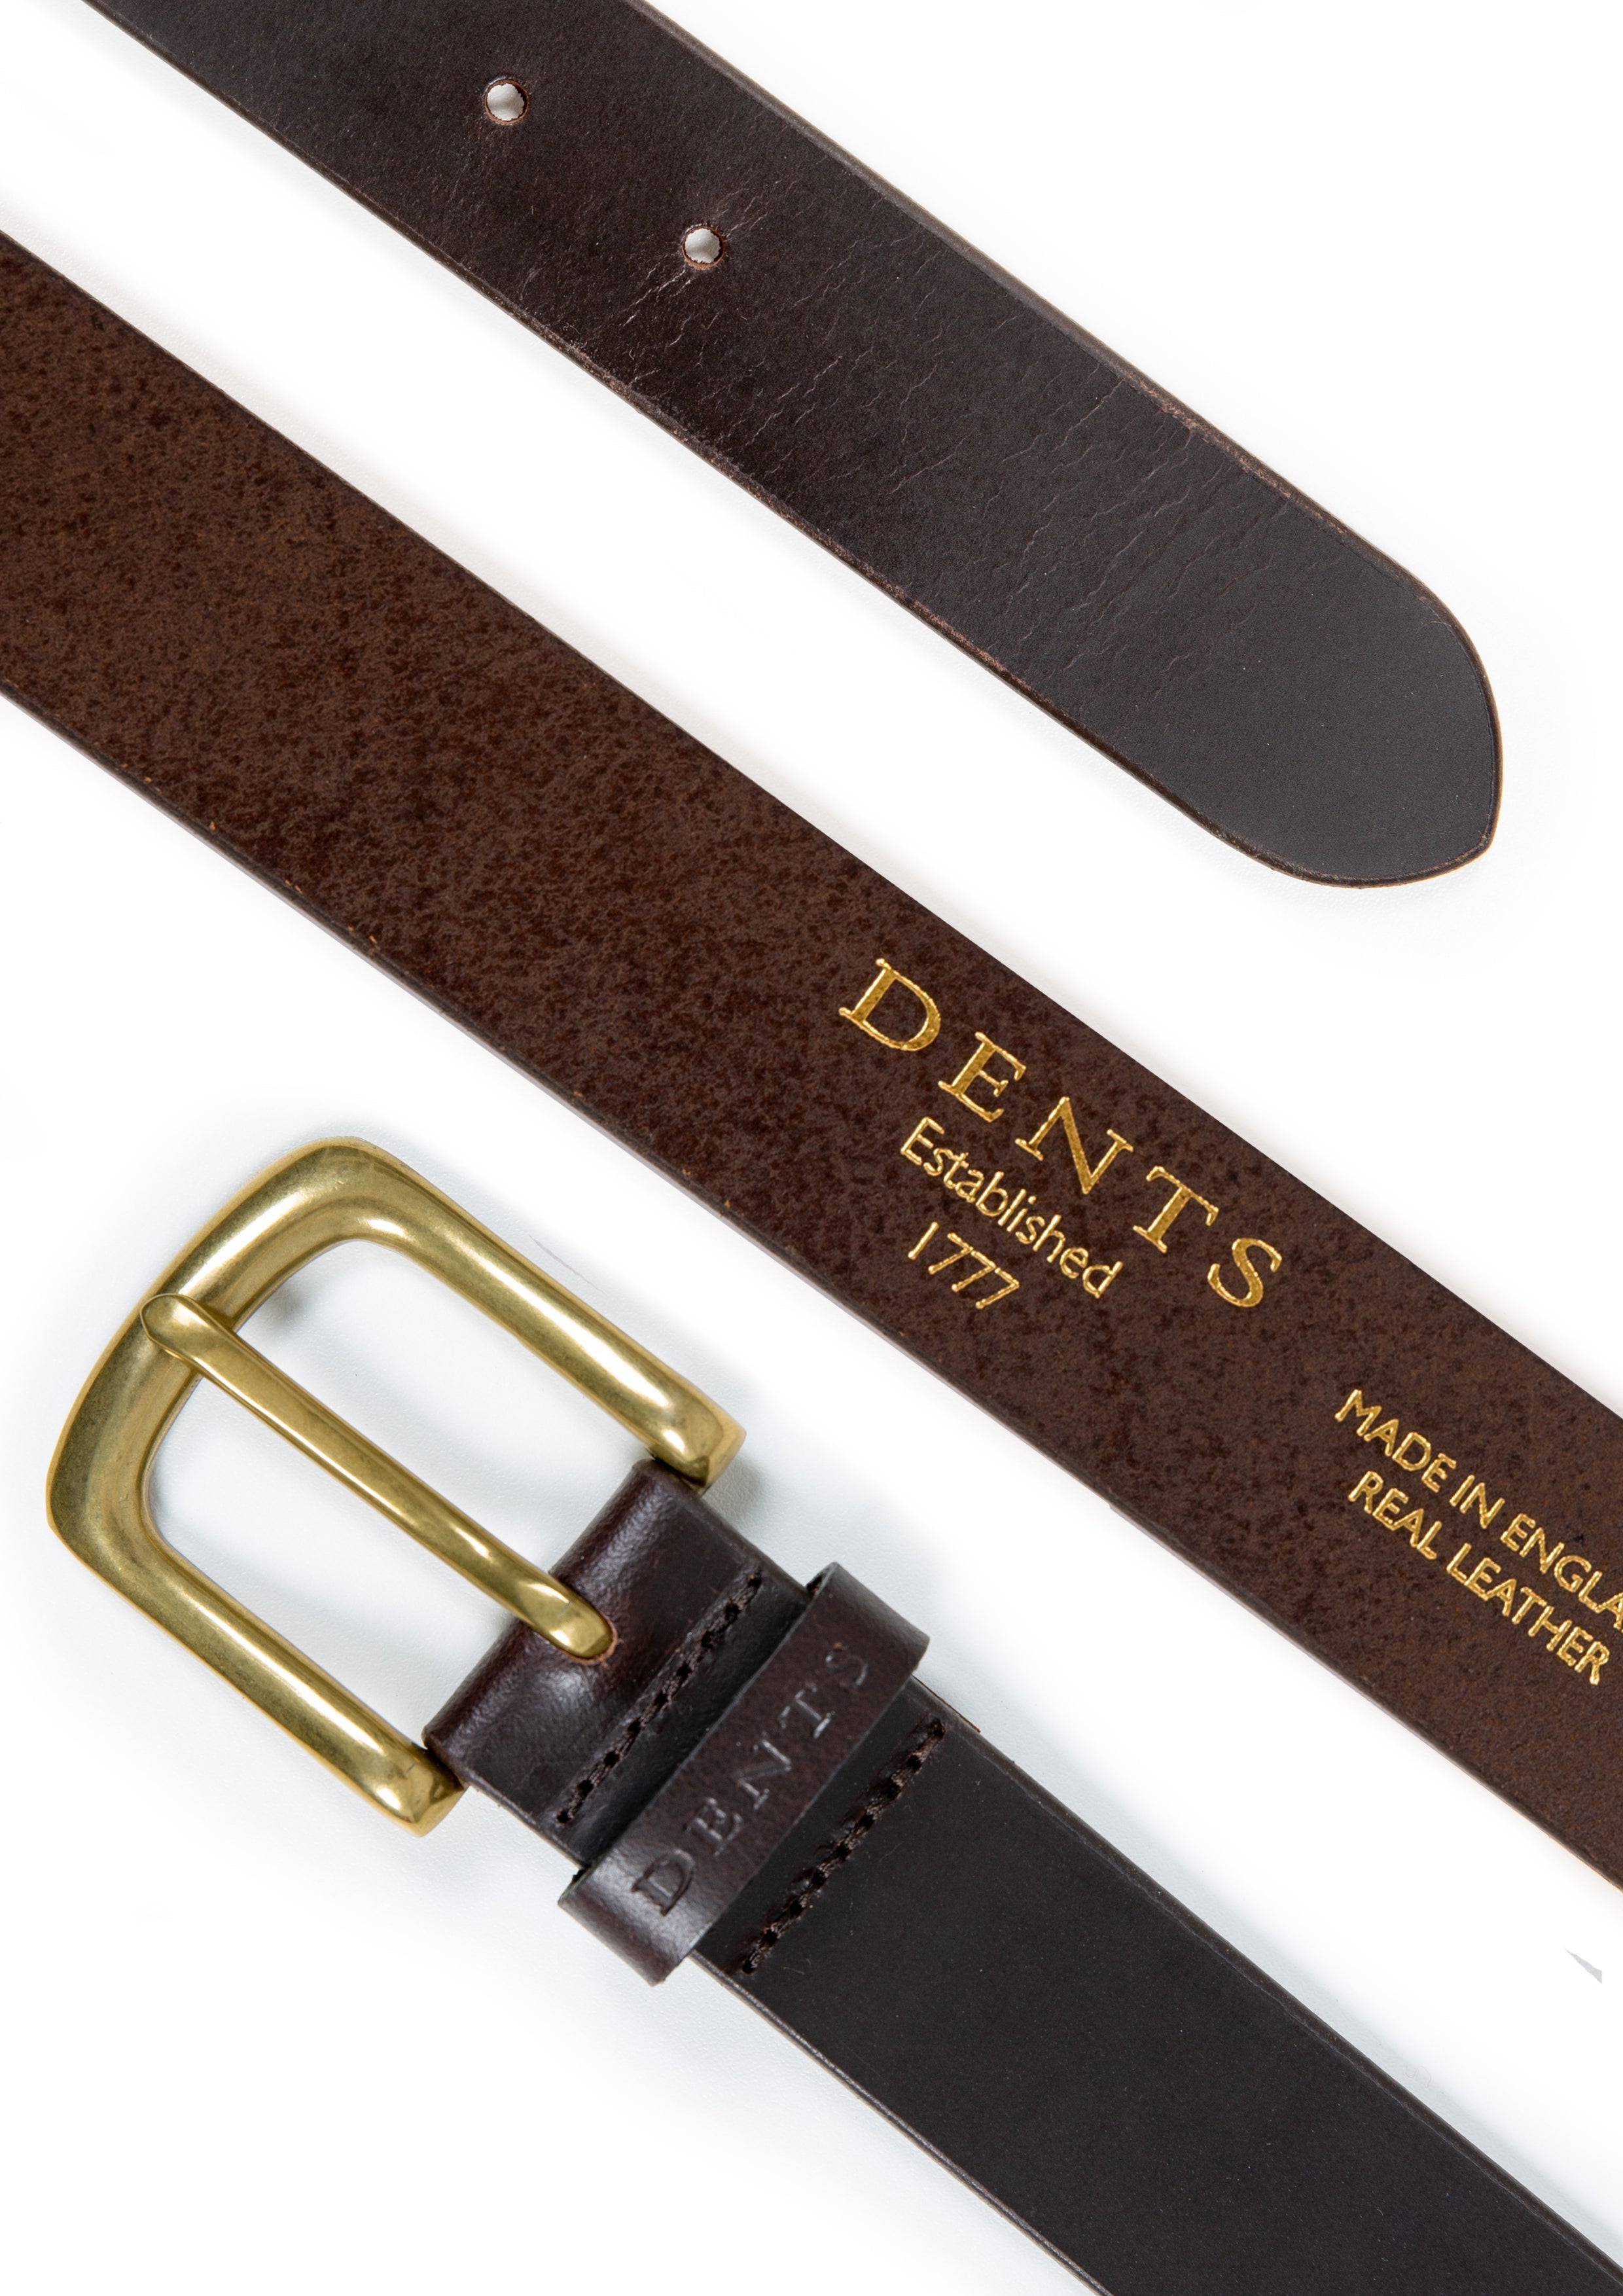 Leather Hobble Belt with Brass Buckle  Buy Men's Leather Belts Online -  Angus Barrett Saddlery